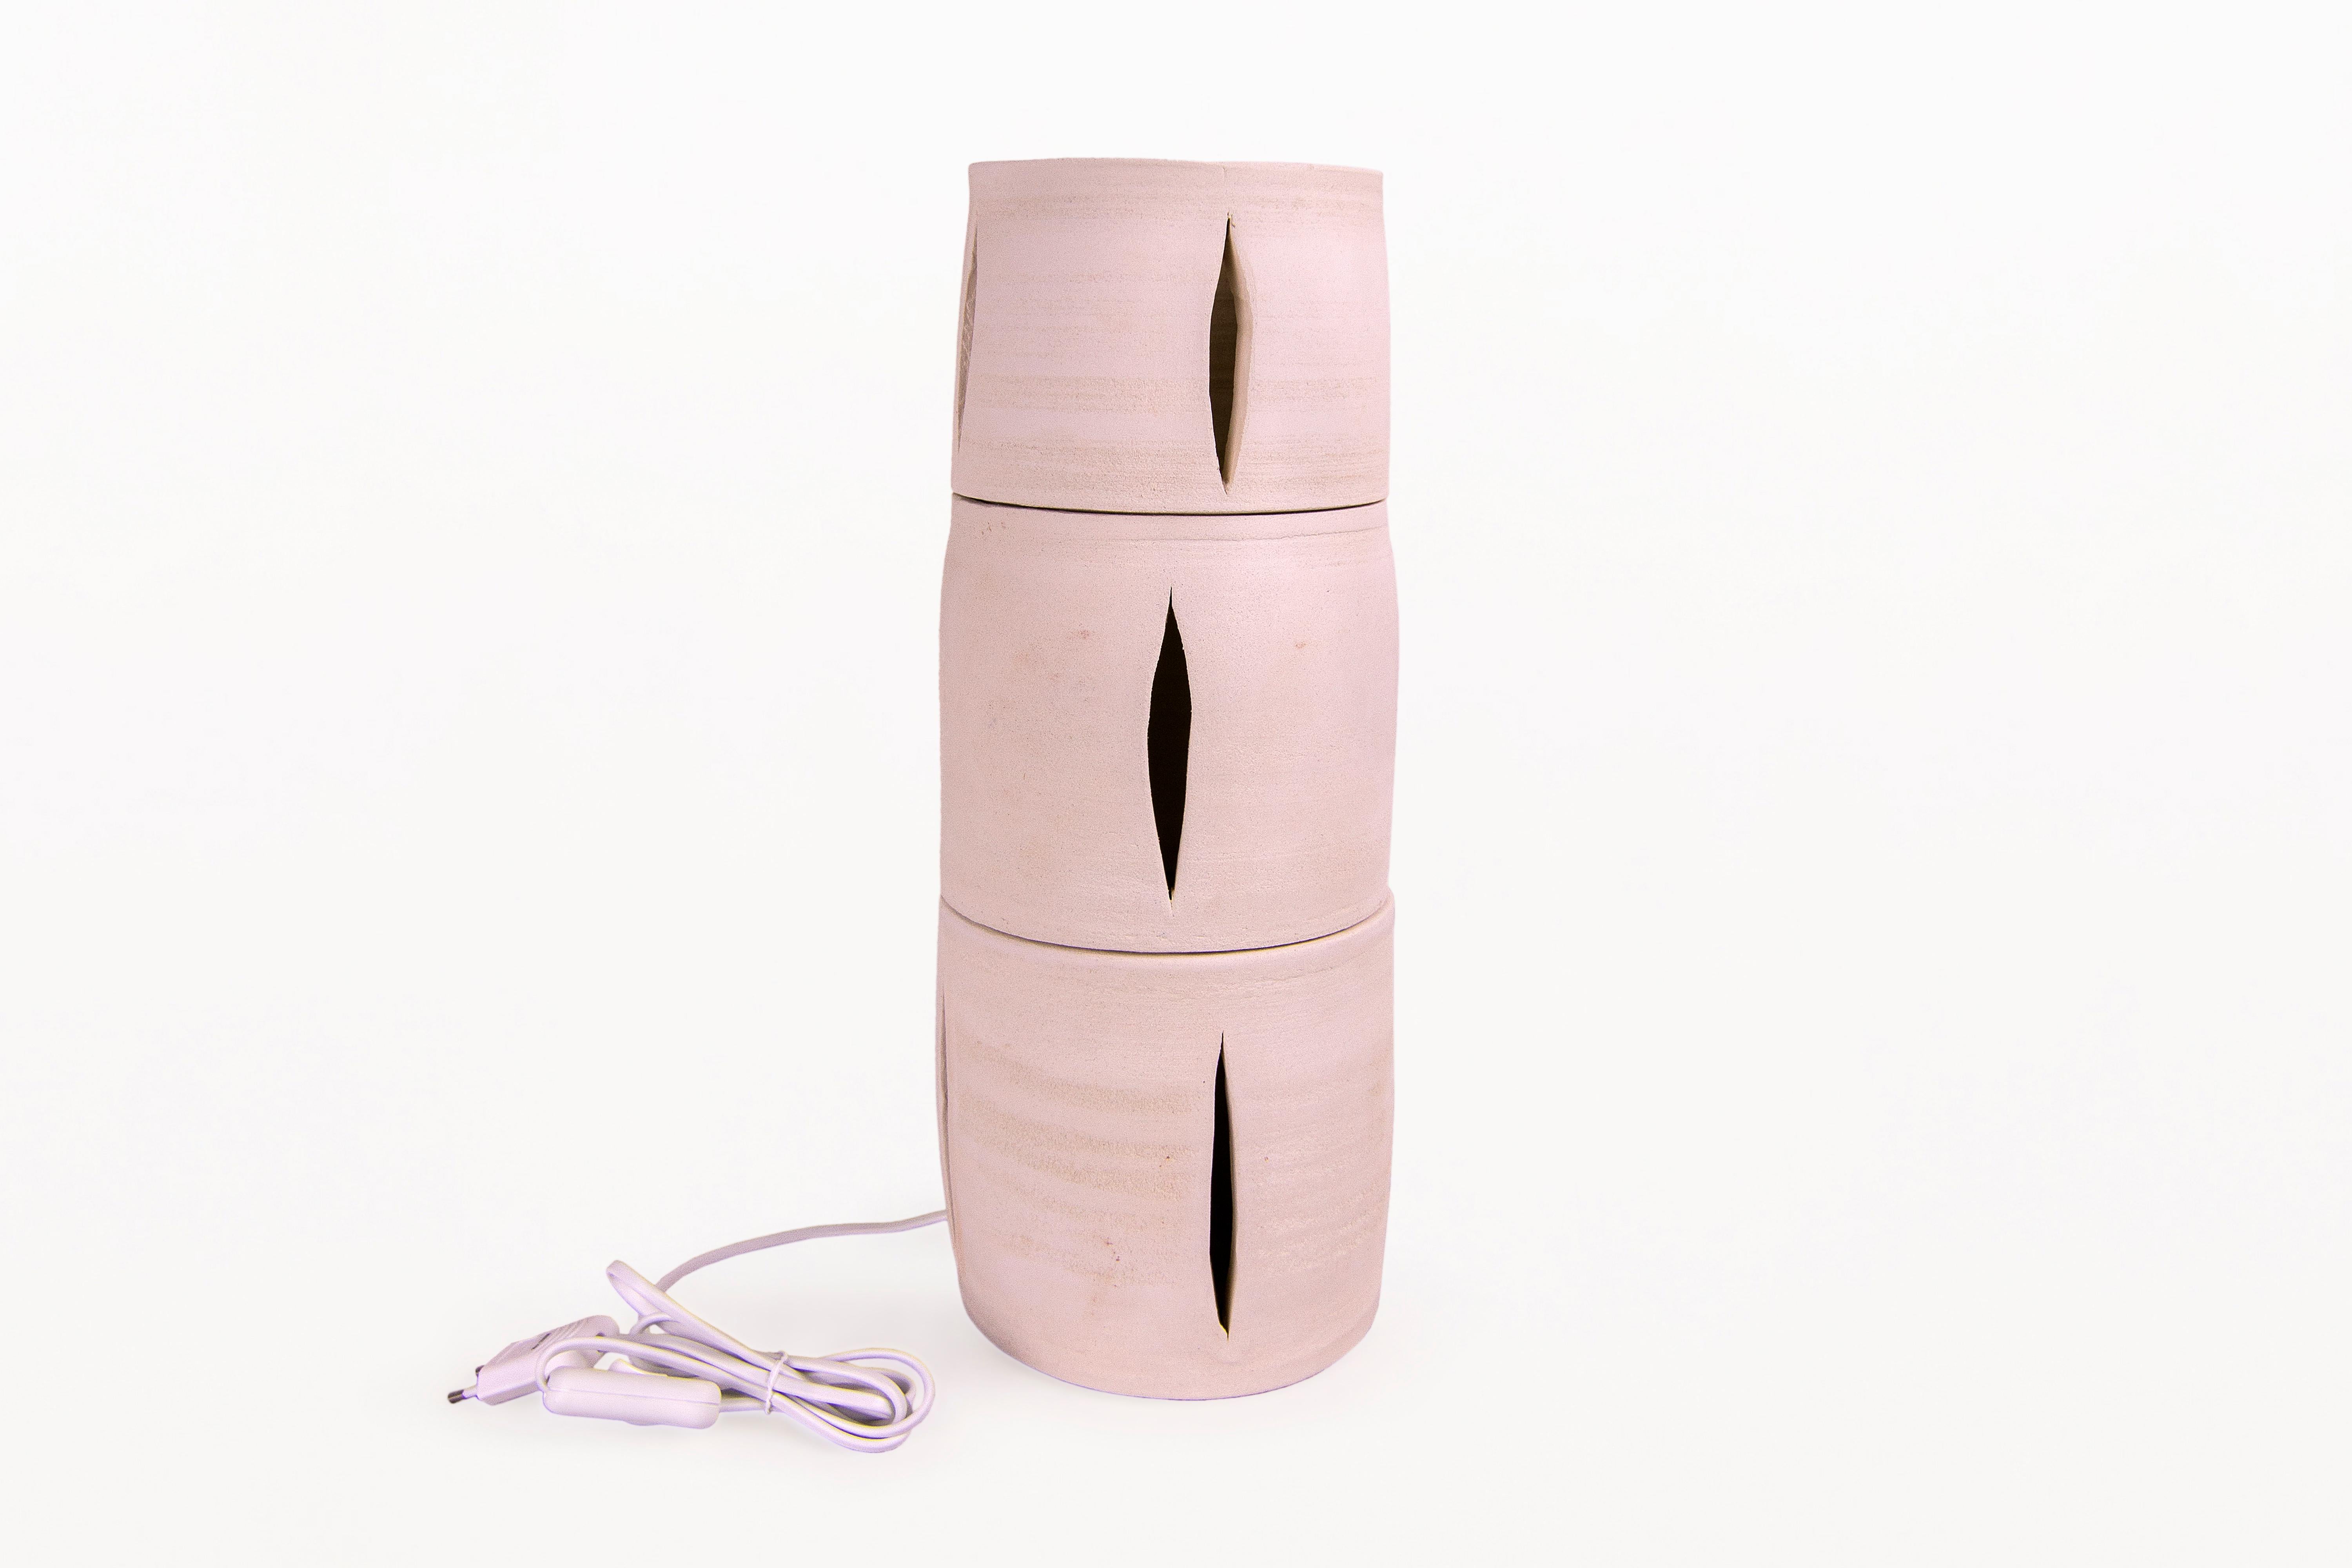 Serge Castella table lamp.
Bisque ceramic table lamp.
It is disassembled in three pieces.
Limited edition 1/50.
2019, France.
Excellent condition.
While studying fashion in Paris, Serge Castella spent his time wandering around flea markets and